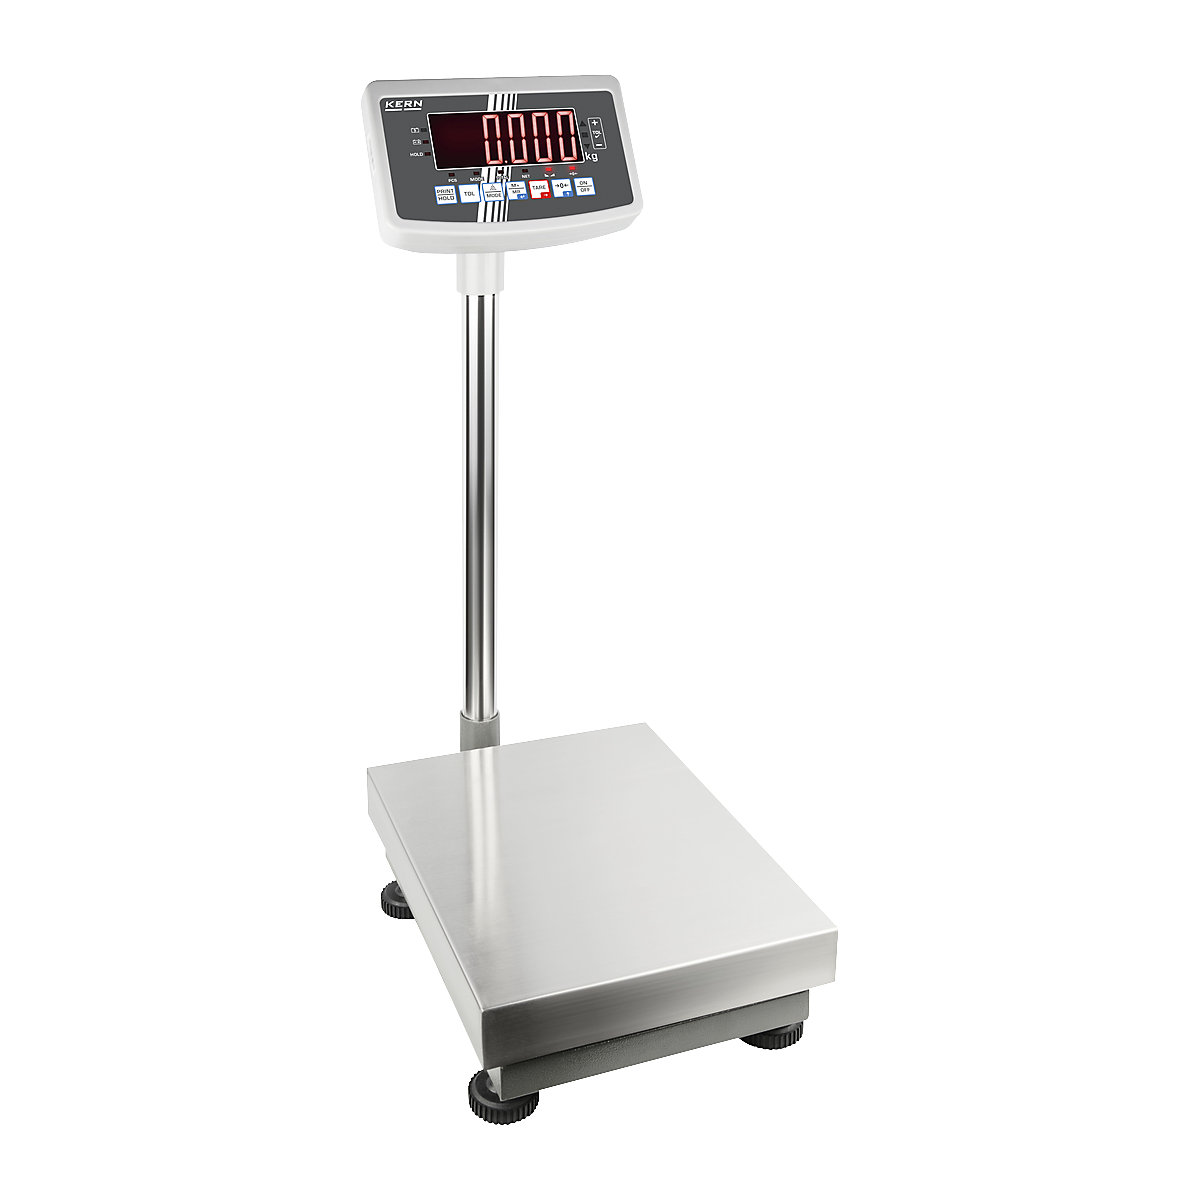 Platform scales – KERN, with large weighing plate, weighing range up to 30 kg, read-out accuracy 2 g-2